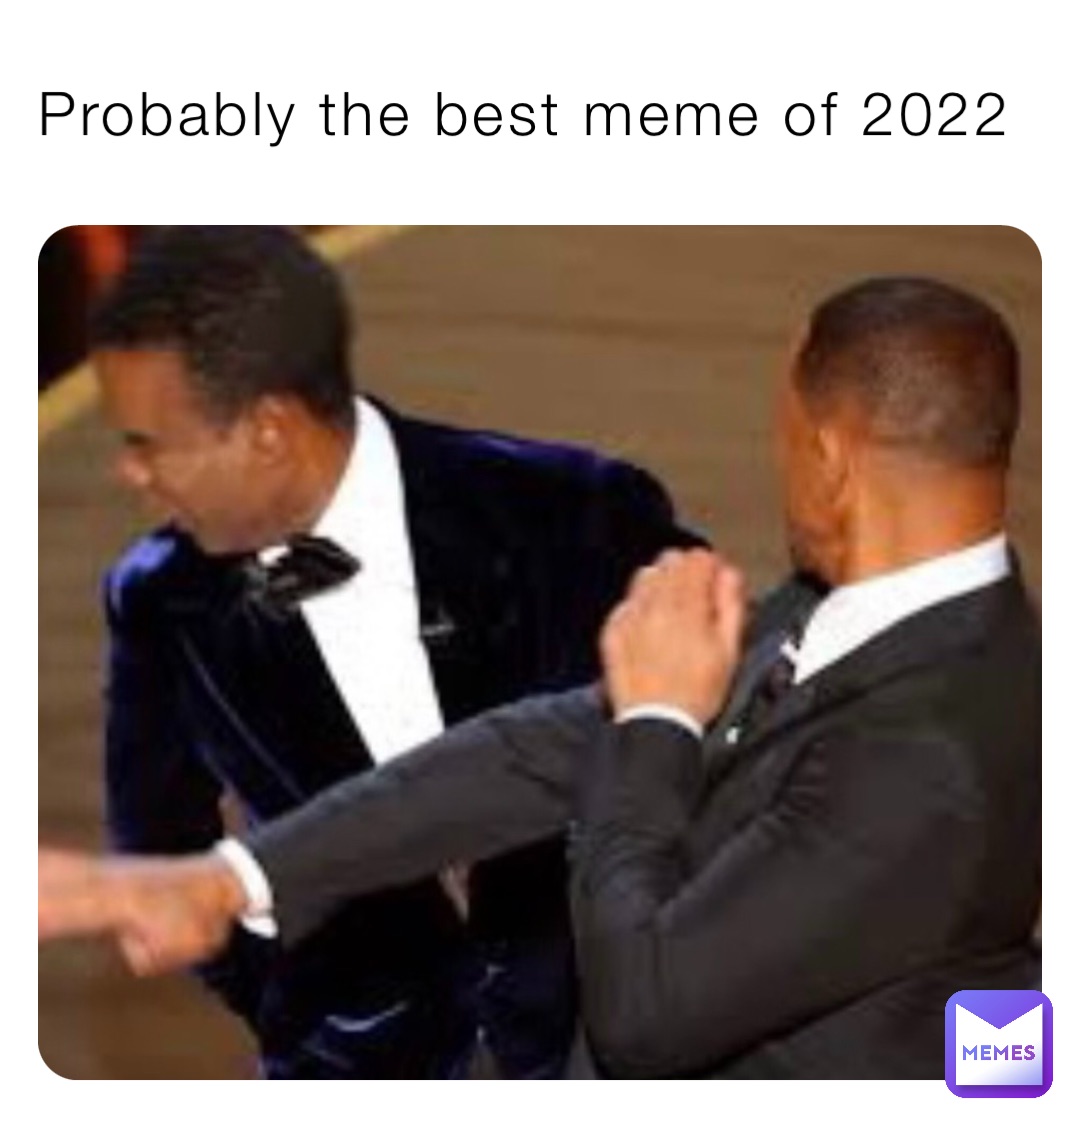 Probably the best meme of 2022